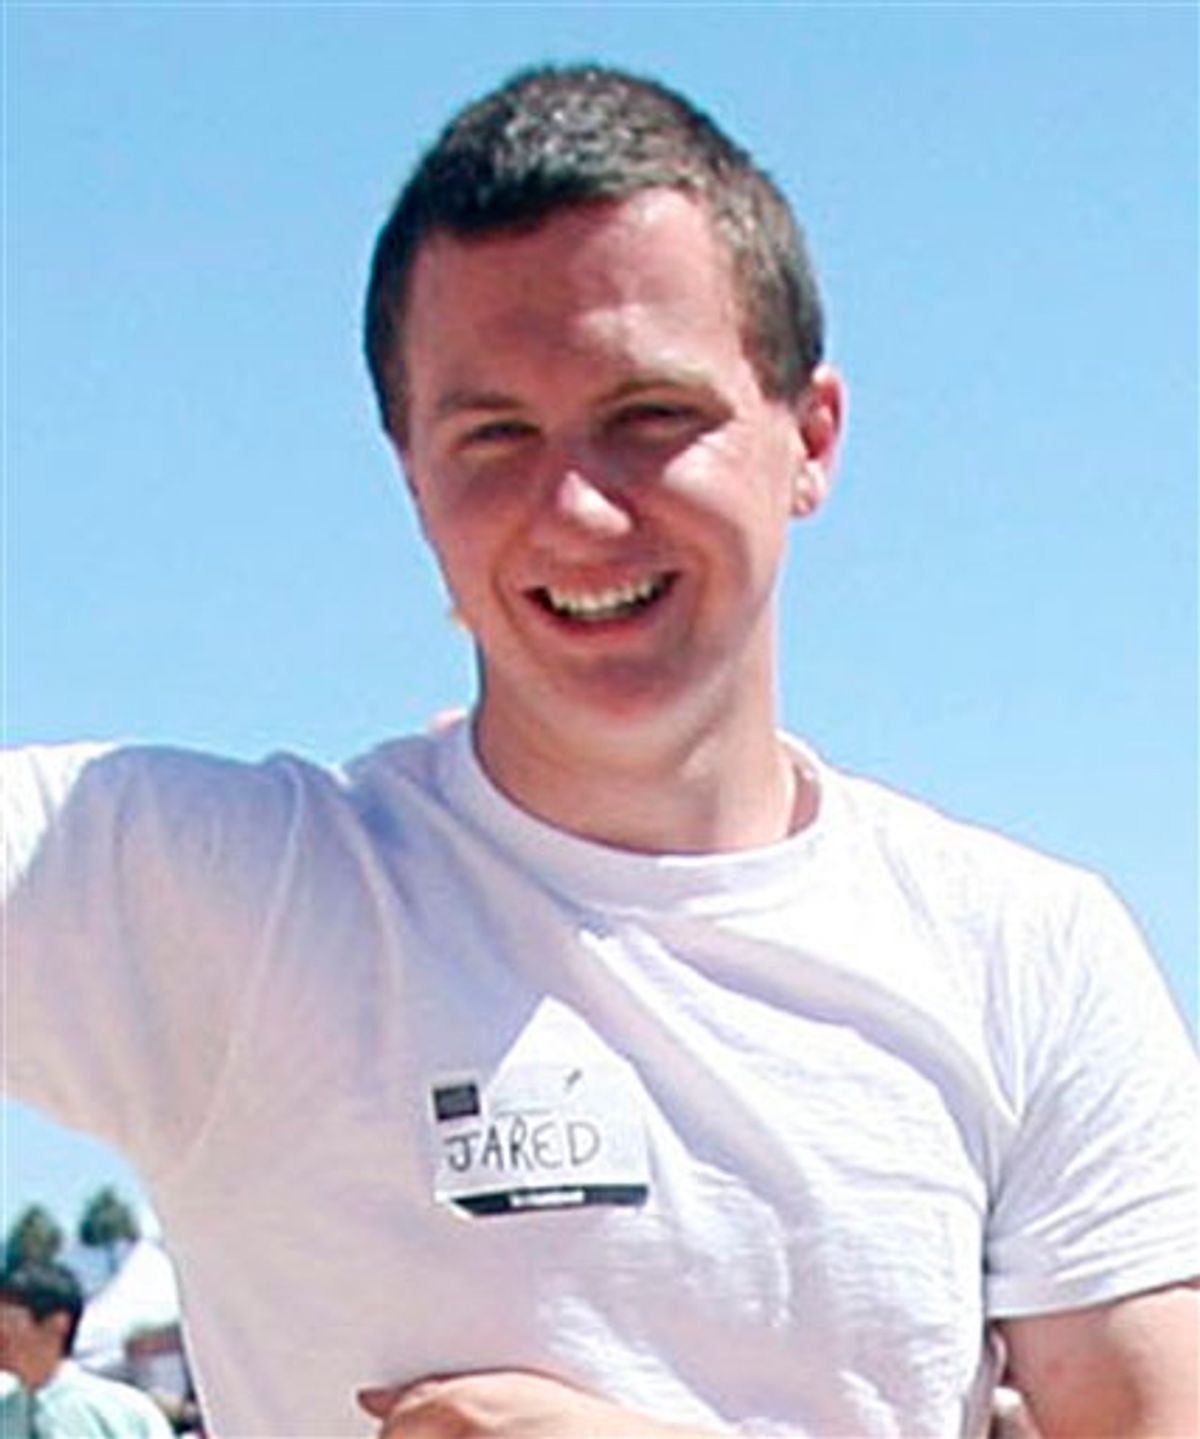 This March 2010 photo shows a man identified as Jared L. Loughner at the 2010 Tucson Festival of Books in Tucson, Ariz. The Arizona Daily Star, a festival sponsor, confirmed from their records that the subject's address matches one under investigation by police after a shooting in Tucson that left U.S. Rep. Gabrielle Giffords wounded and at least five others dead. Police say a suspect is in custody, and he was identified by people familiar with the investigation as Jared Loughner, 22, of Tucson.    (AP Photo/Arizona Daily Star, Mamta Popat) NO MAGS, NO SALES, MANDATORY CREDIT (AP)